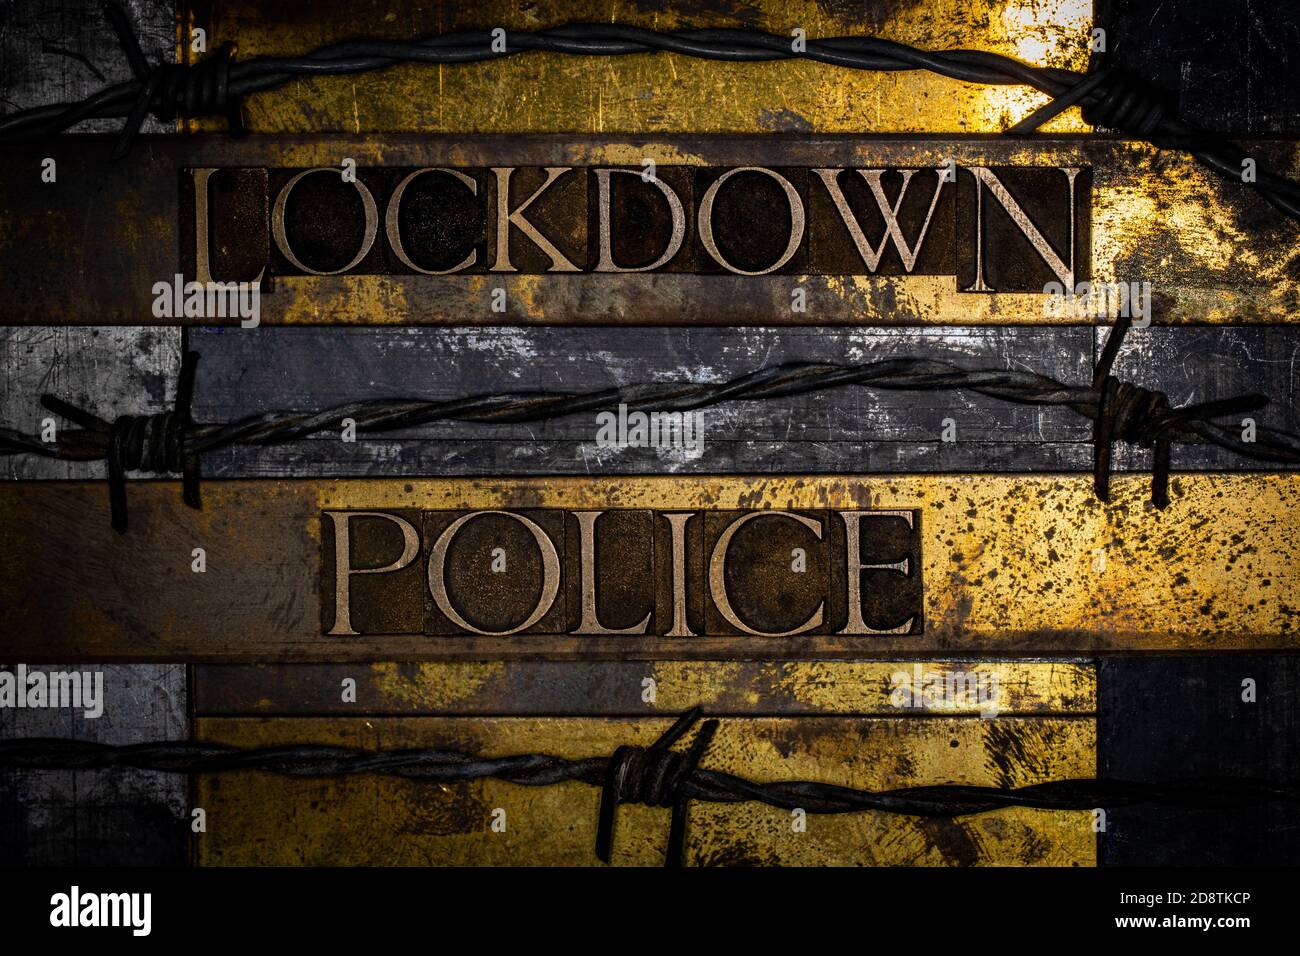 Lockdown Police text message on textured grunge copper and vintage gold background Stock Photo